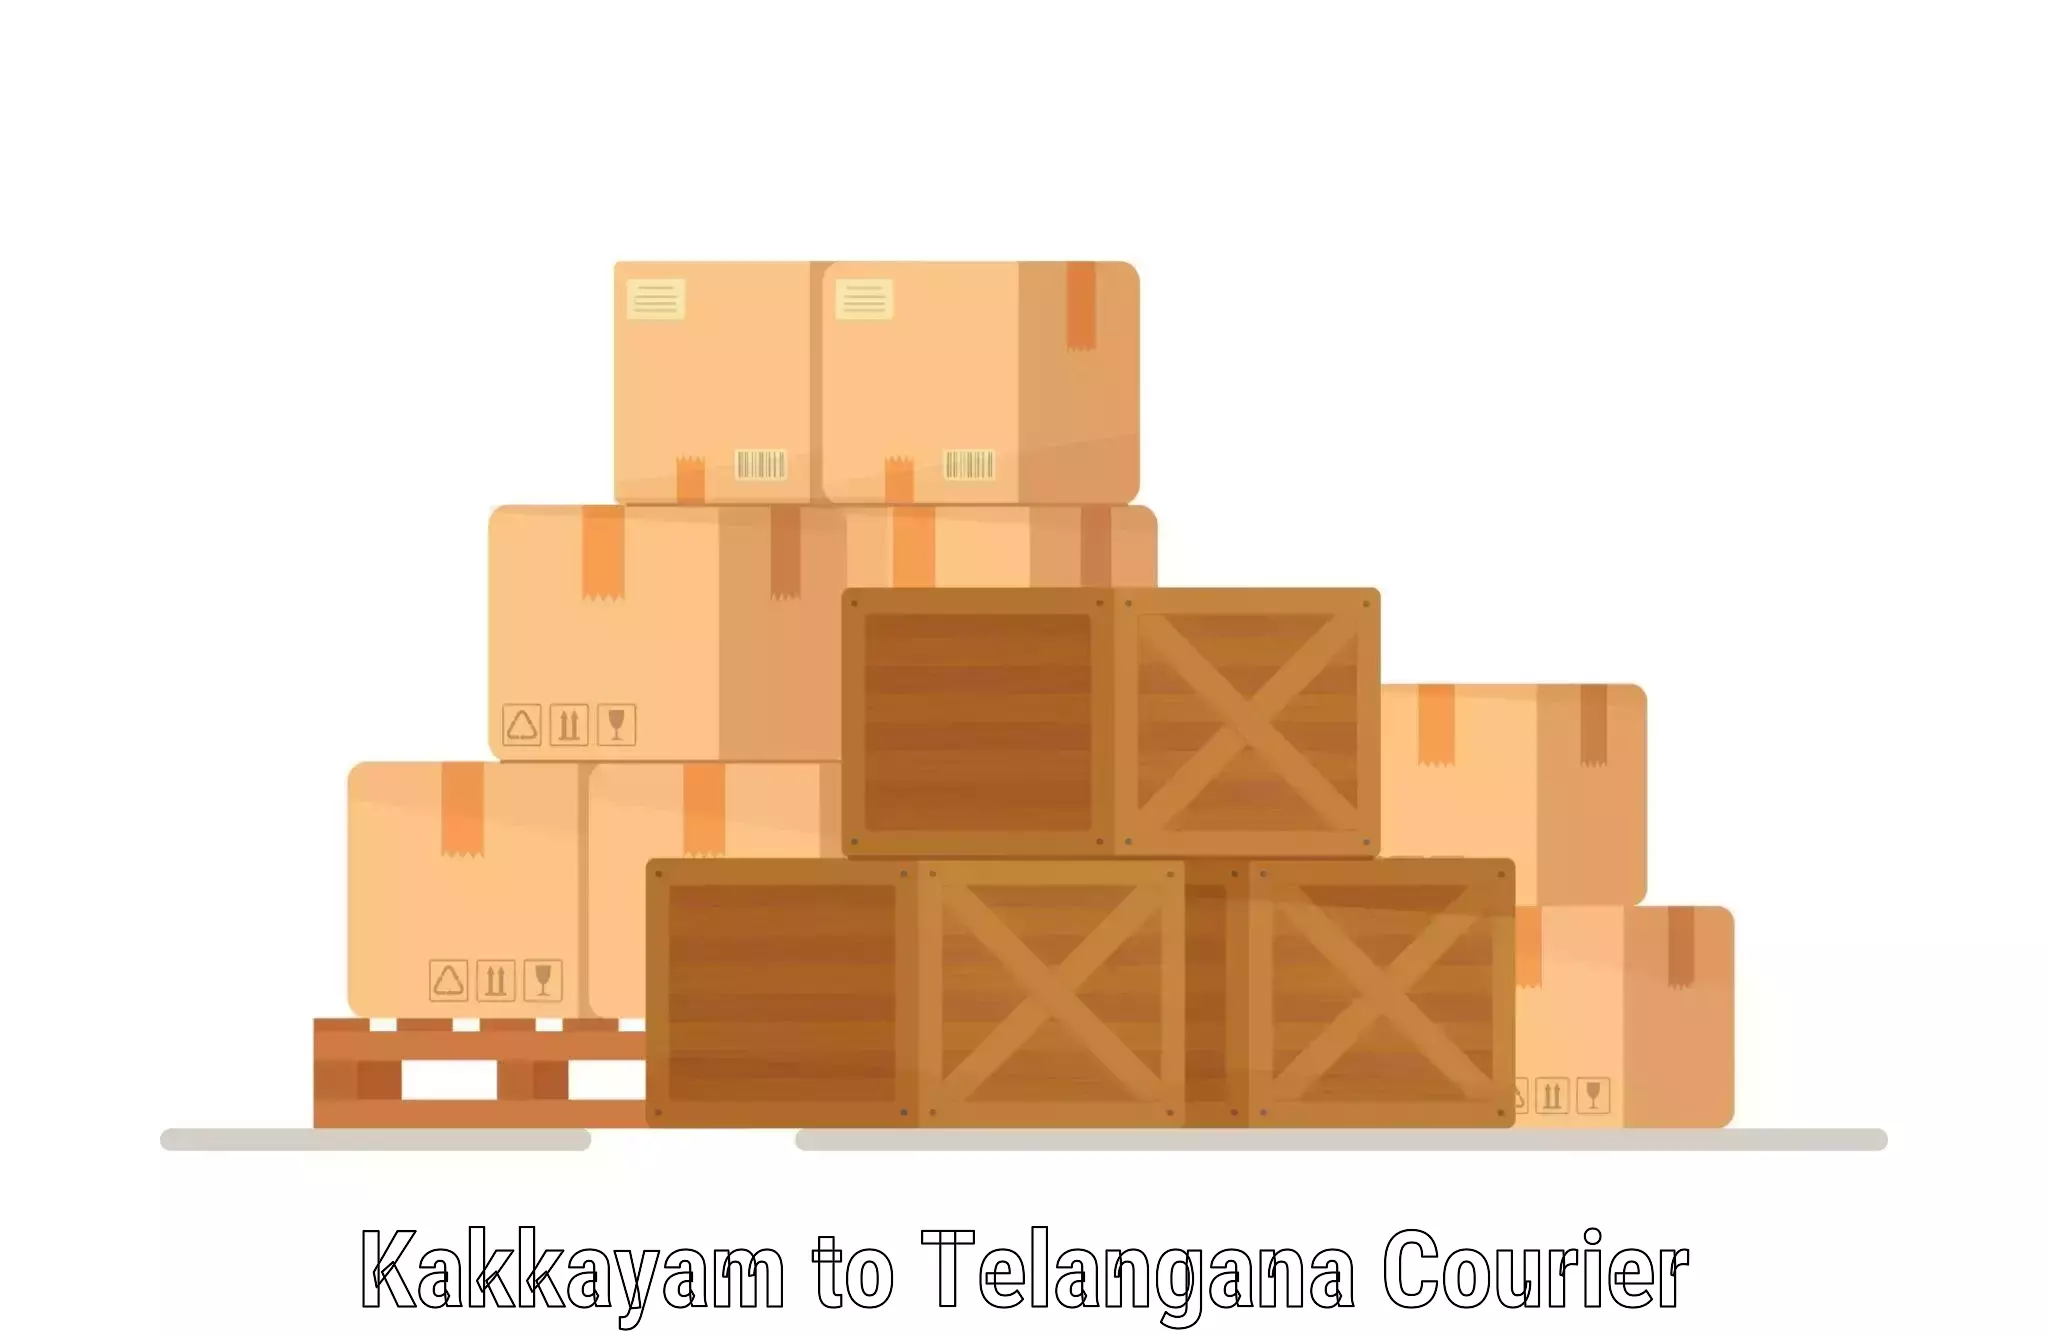 Tech-enabled shipping in Kakkayam to Allapalli